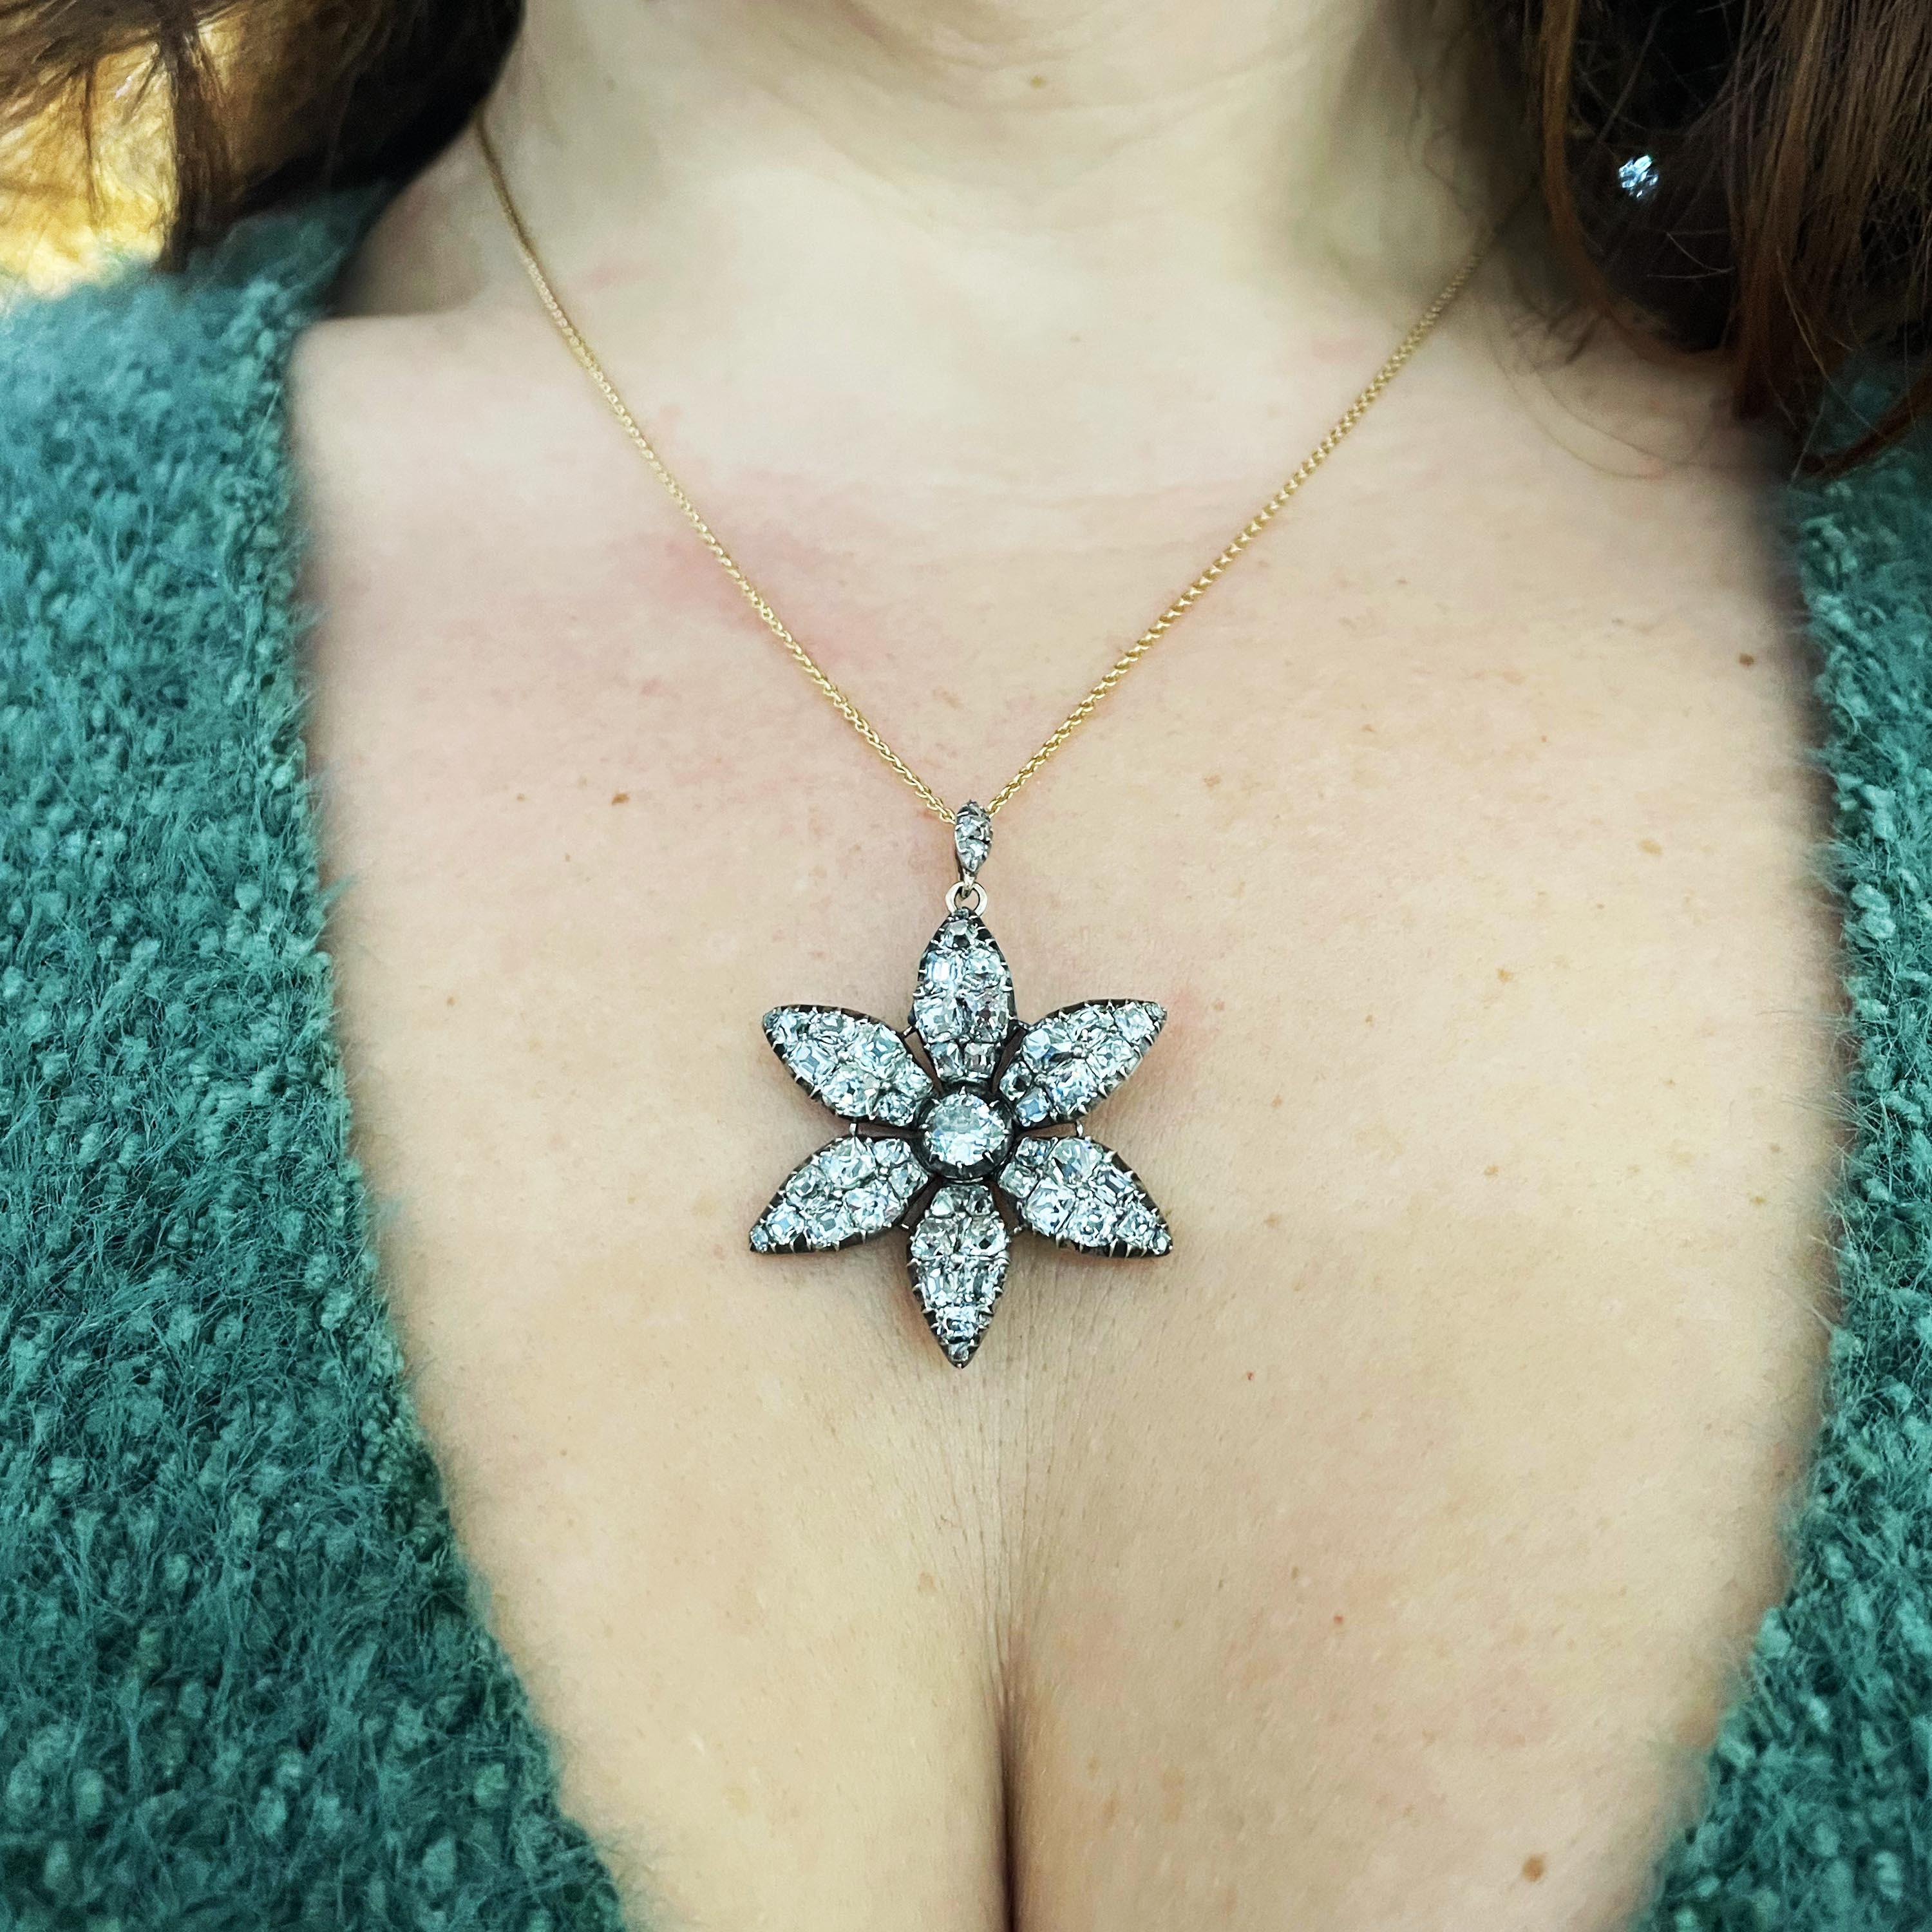 A Georgian old cut diamond flower pendant, with six petals and a diamond set halter, mounted in silver, with scratched inventory marks 7142 C3/-1-, of English origin, circa 1790.

Approximate measurements: Length 32.8mm, width 28.8mm, 42.4mm length